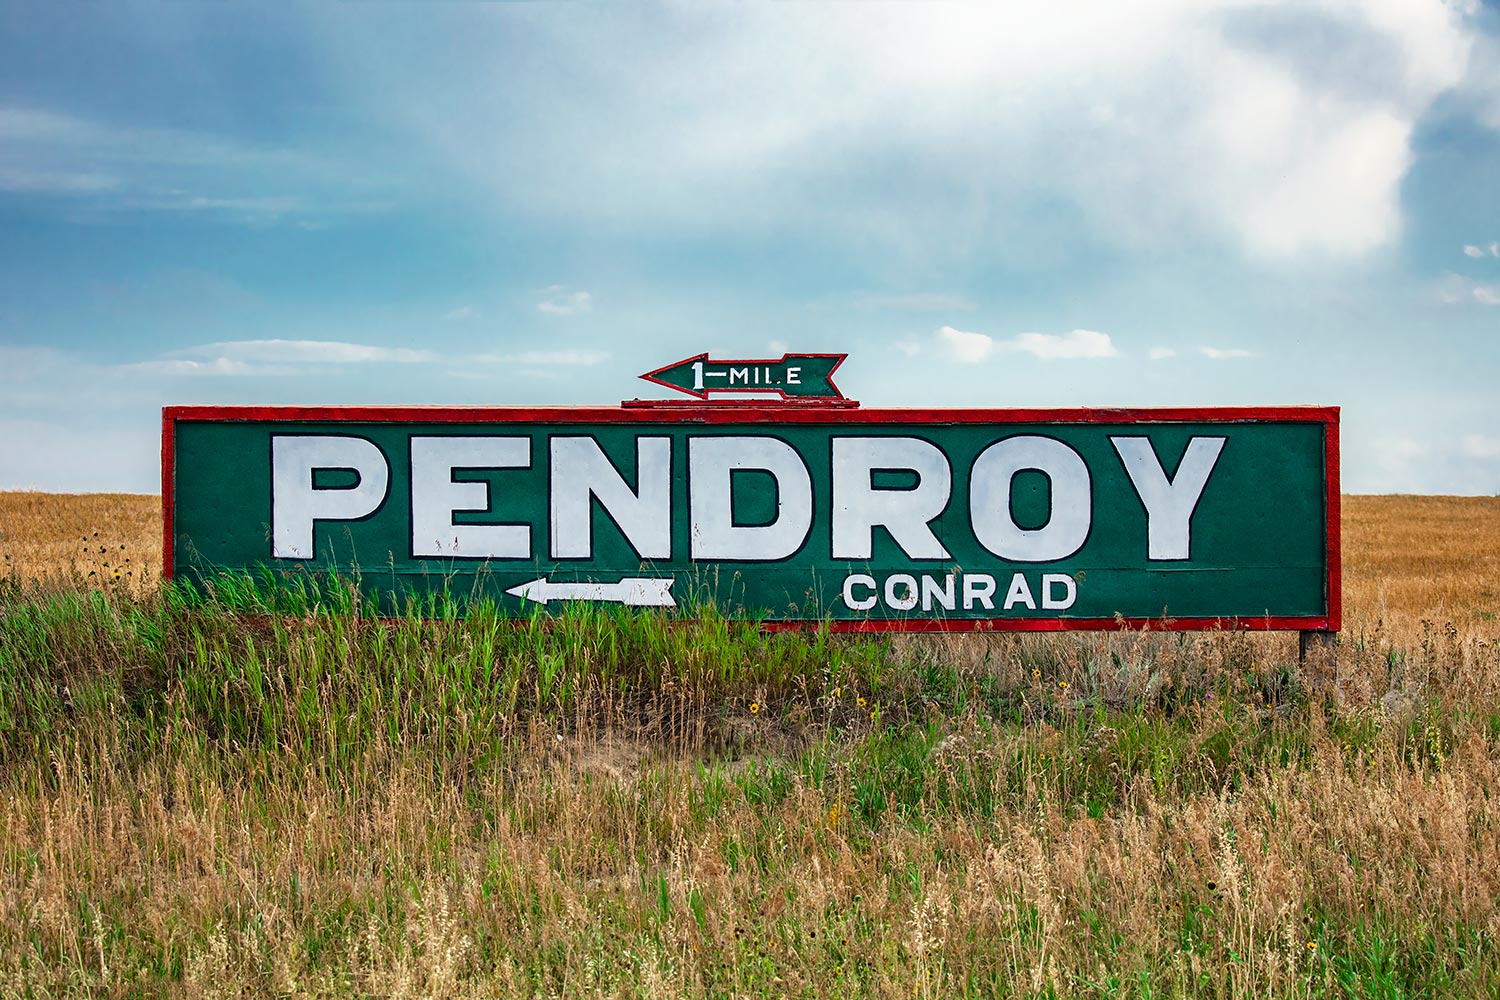 A cool old sign at the intersection of U.S. Highway 89 and Highway 219 directing people to the tiny town of Pendroy, Montana.&nbsp;→ Buy a Print&nbsp;or License Photo